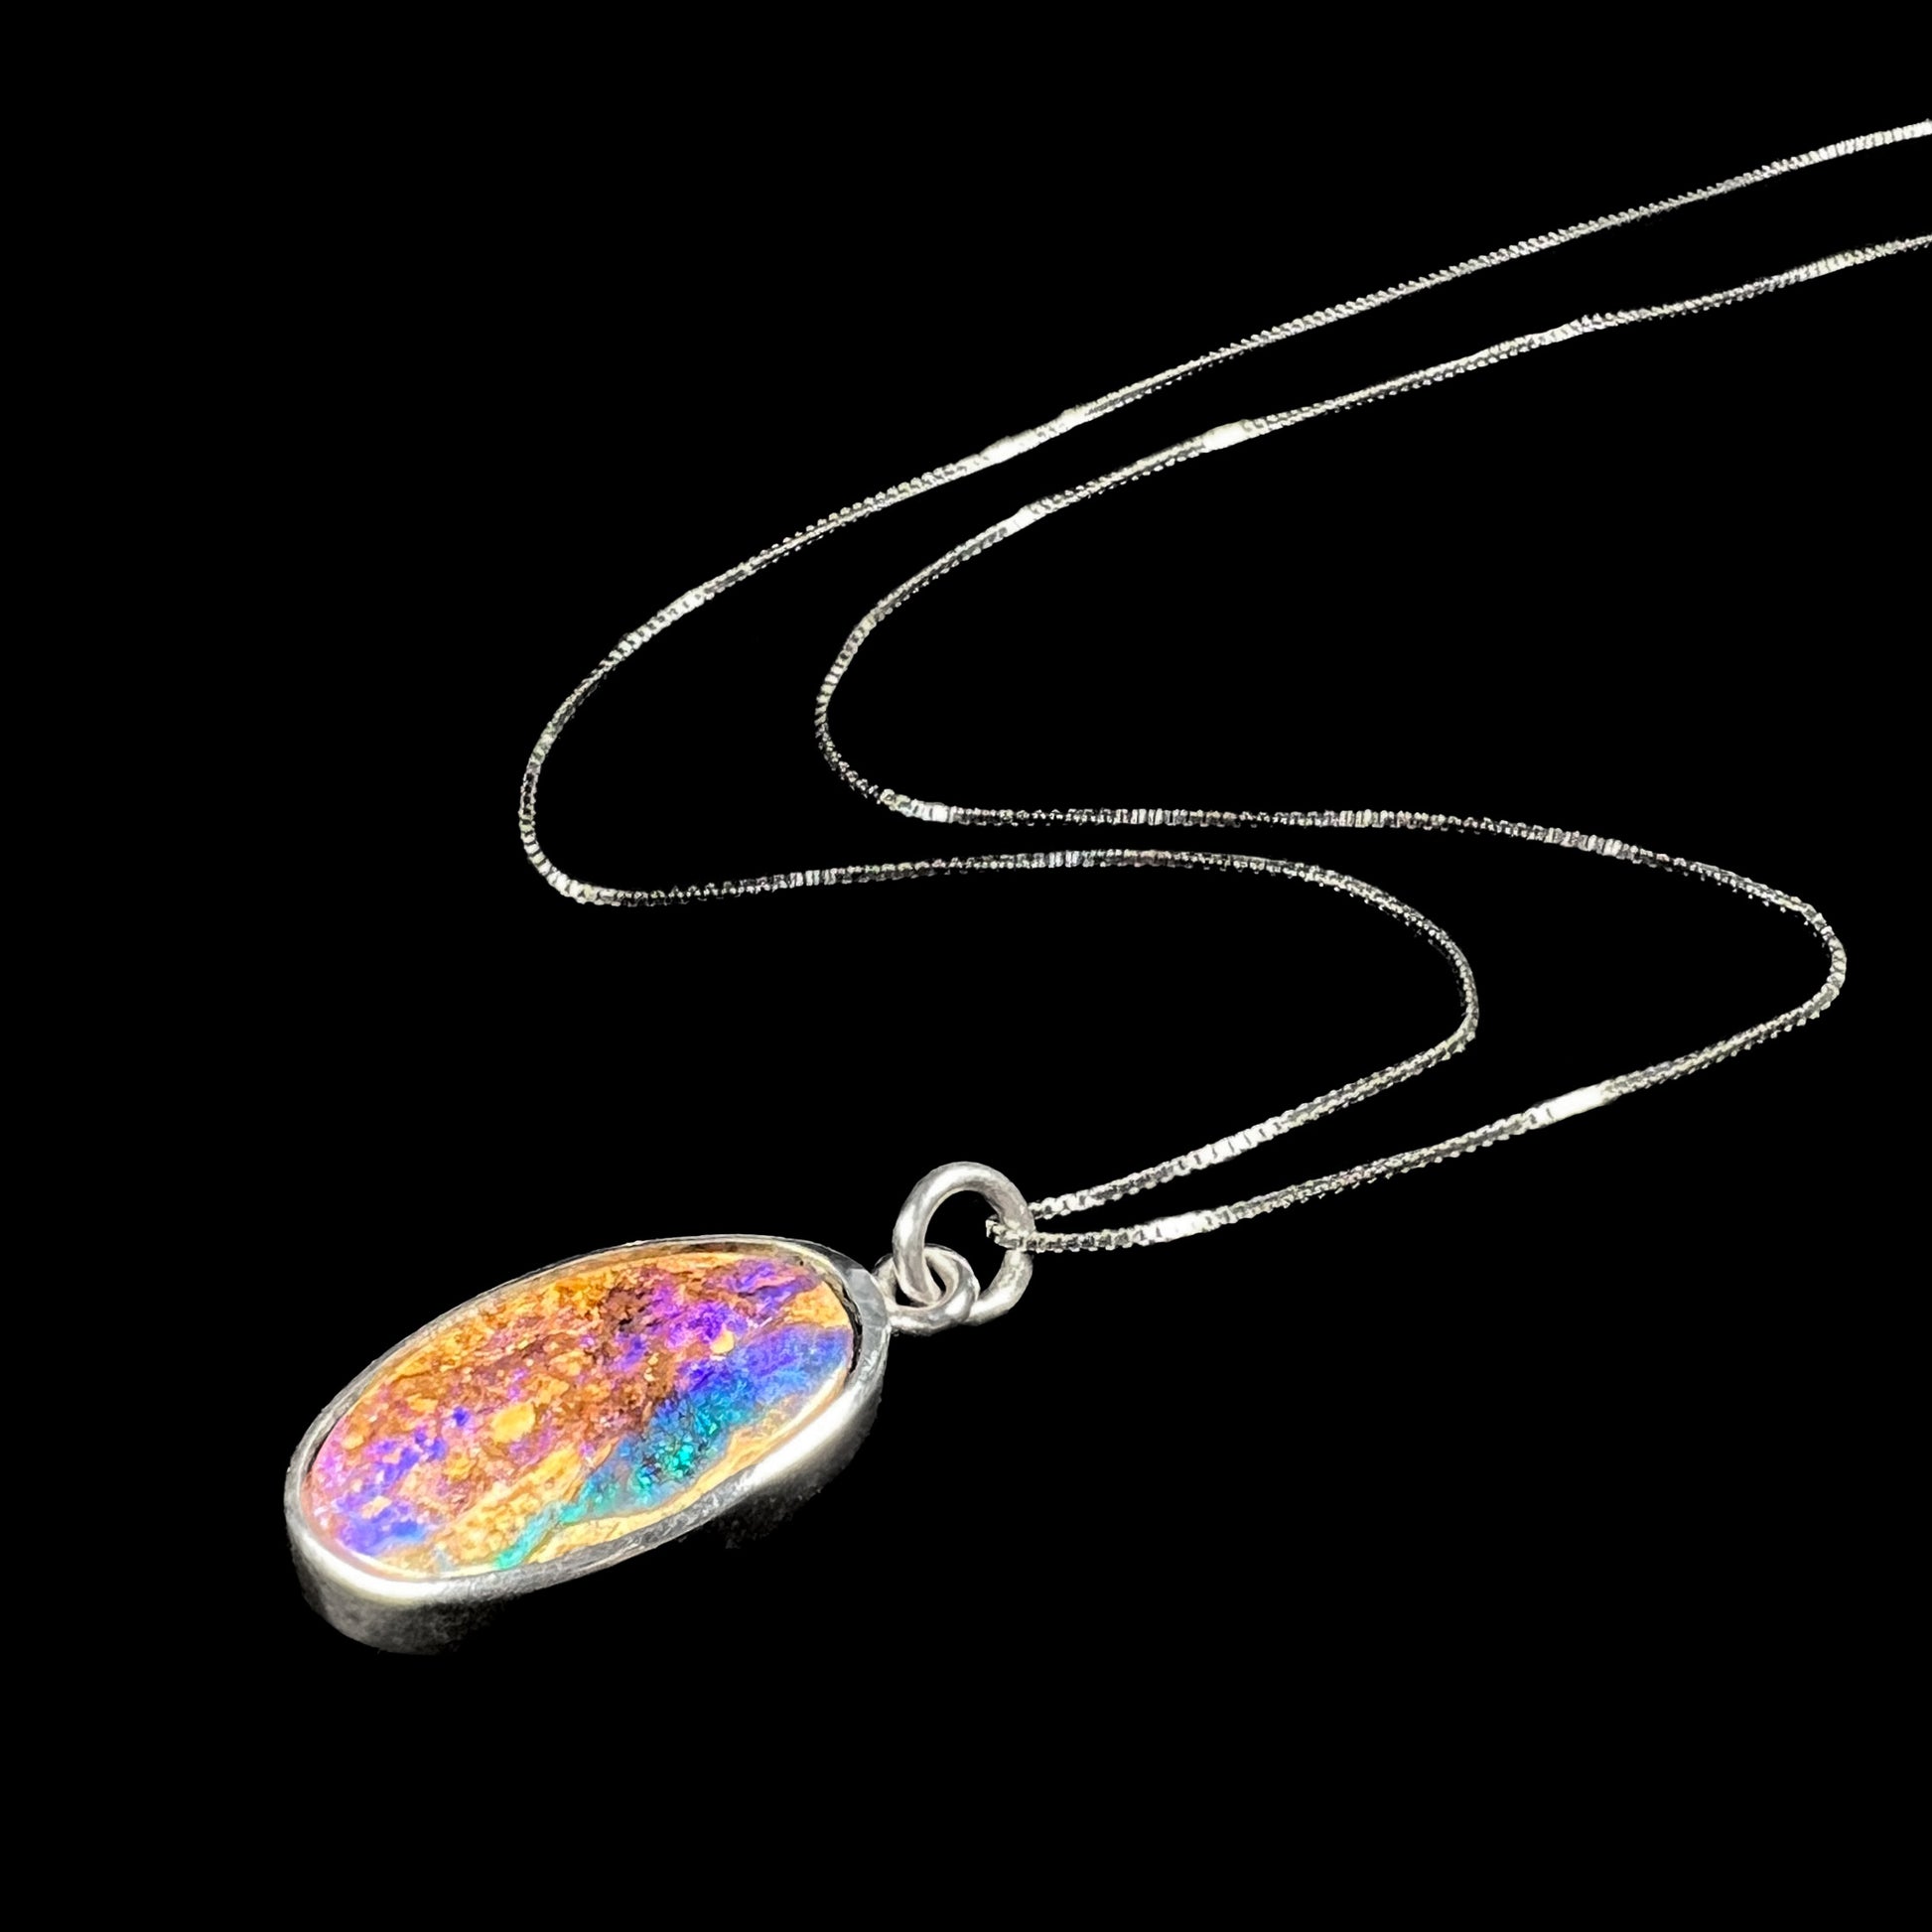 A handmade sterling silver pendant bezel set with an oval cut pipe boulder opal stone.